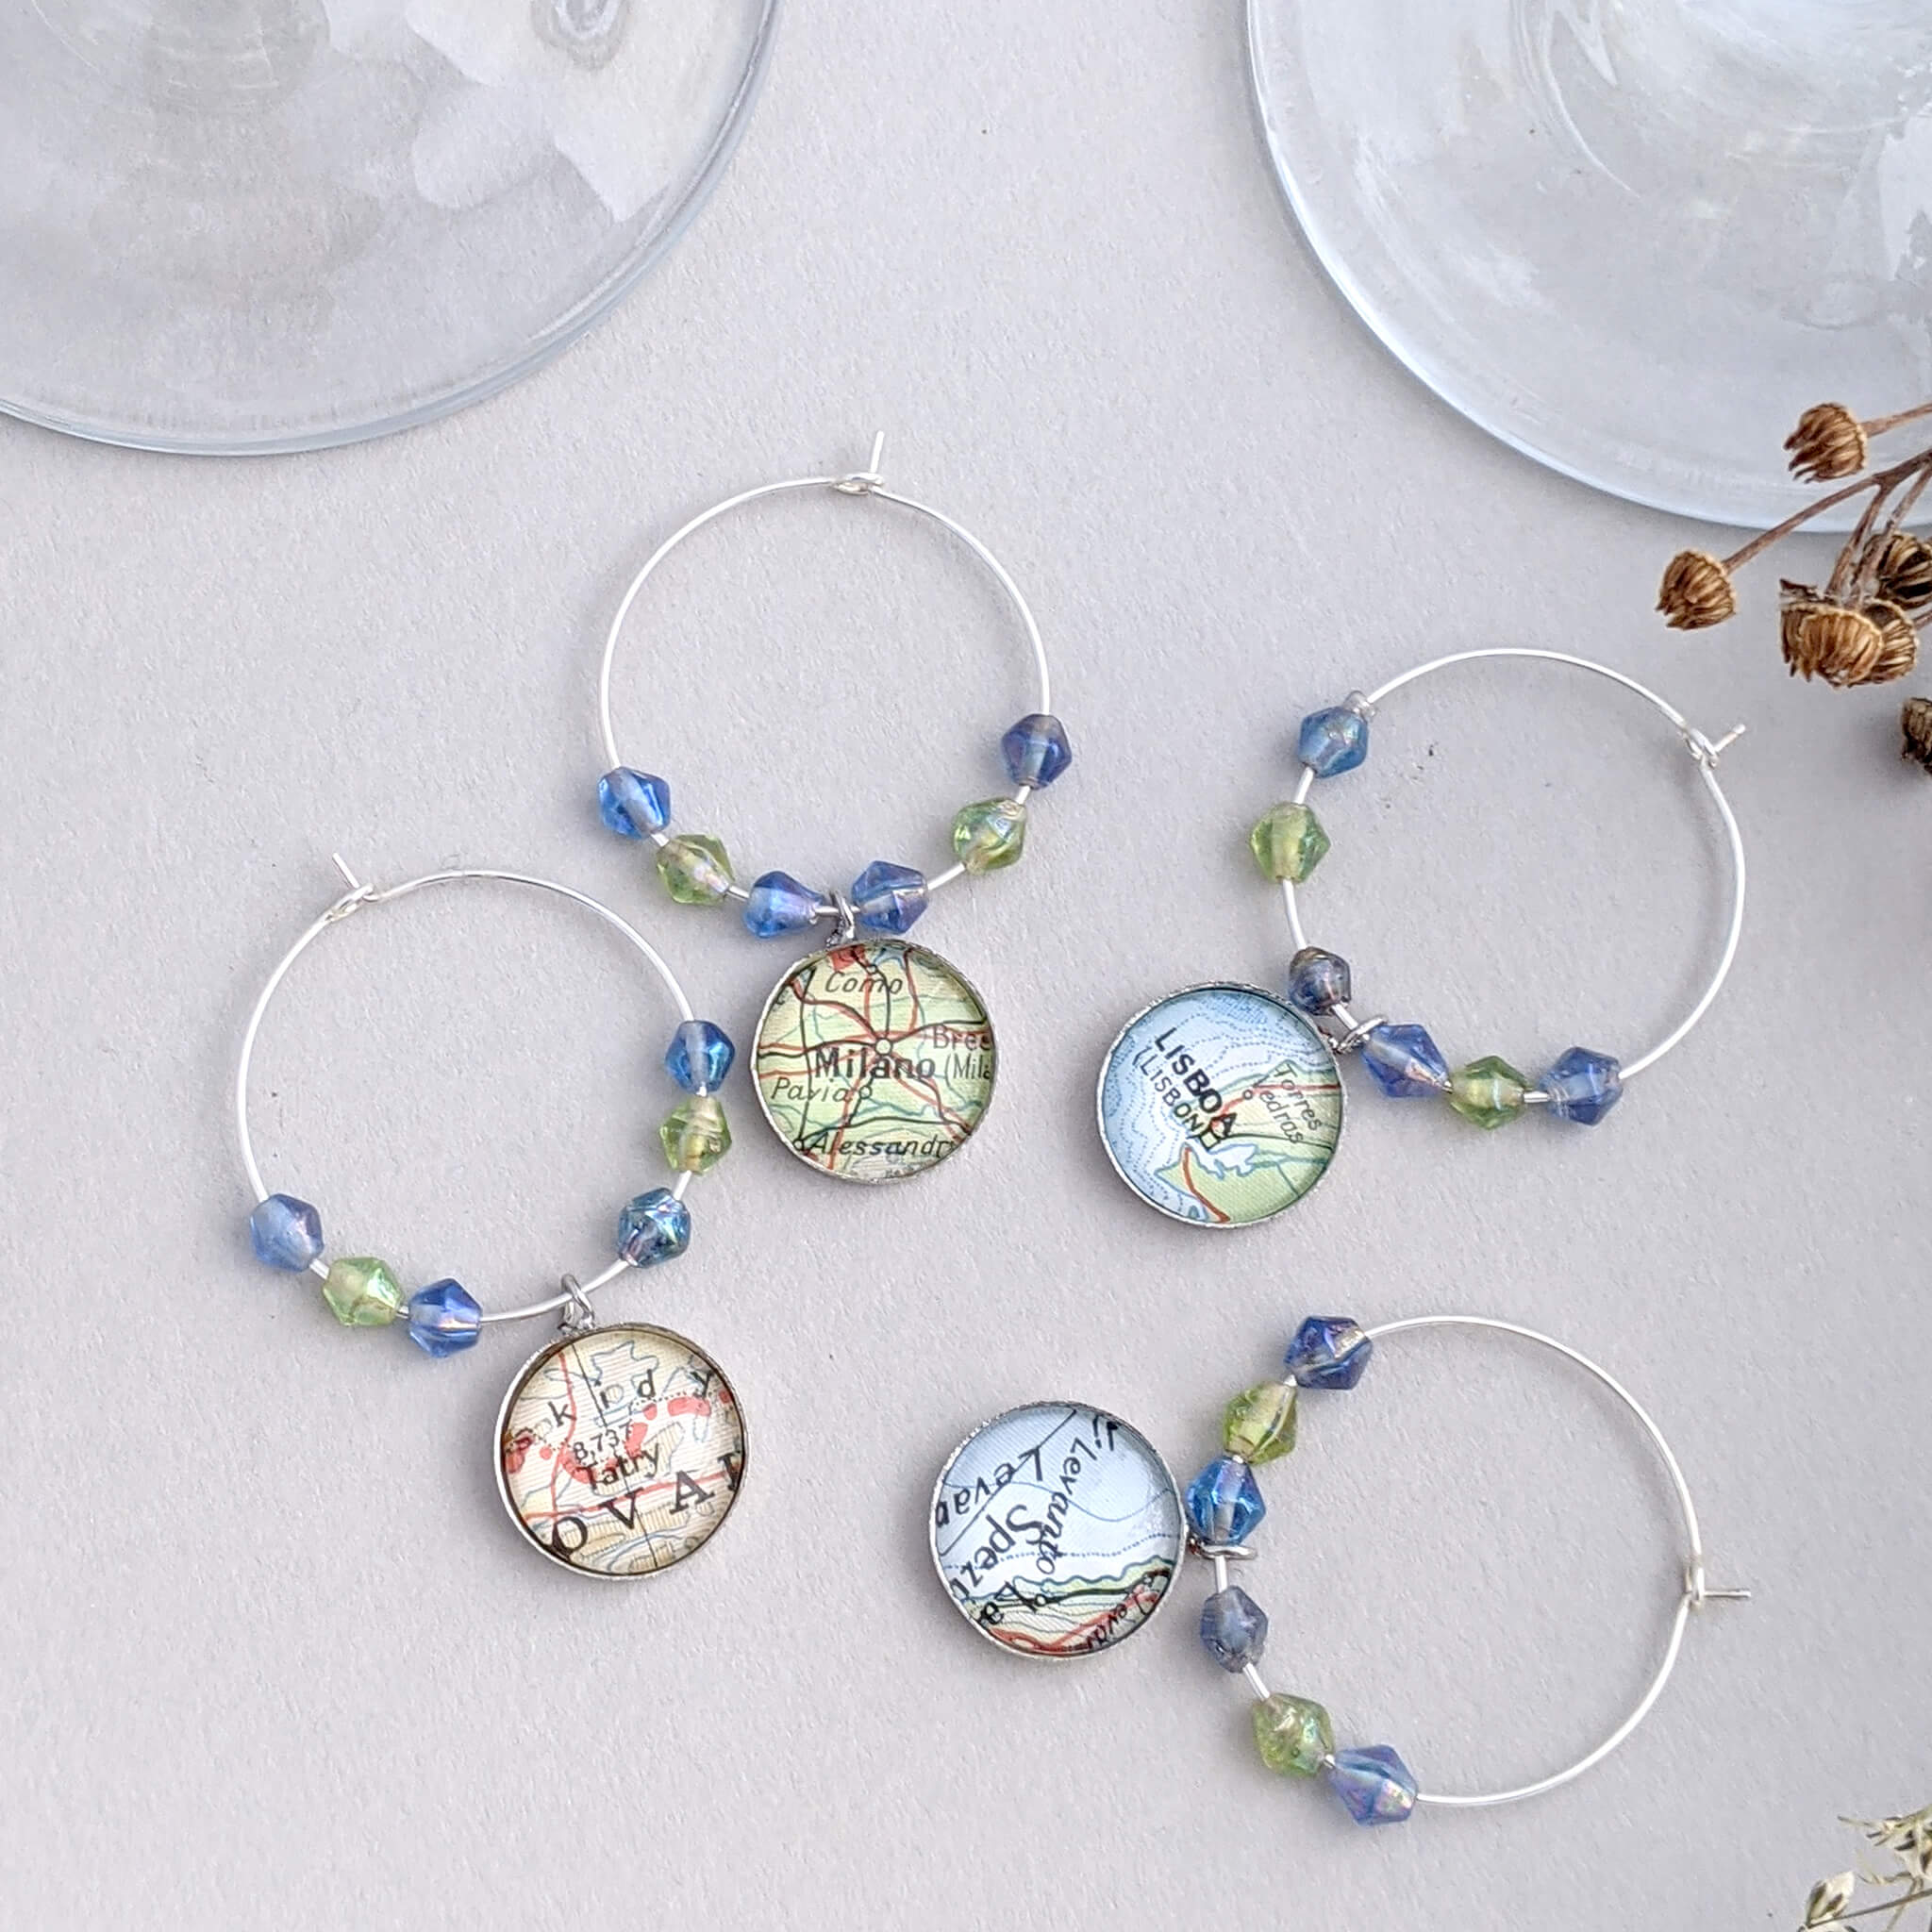 wine glass charms in green and blue tone personalised with map locations